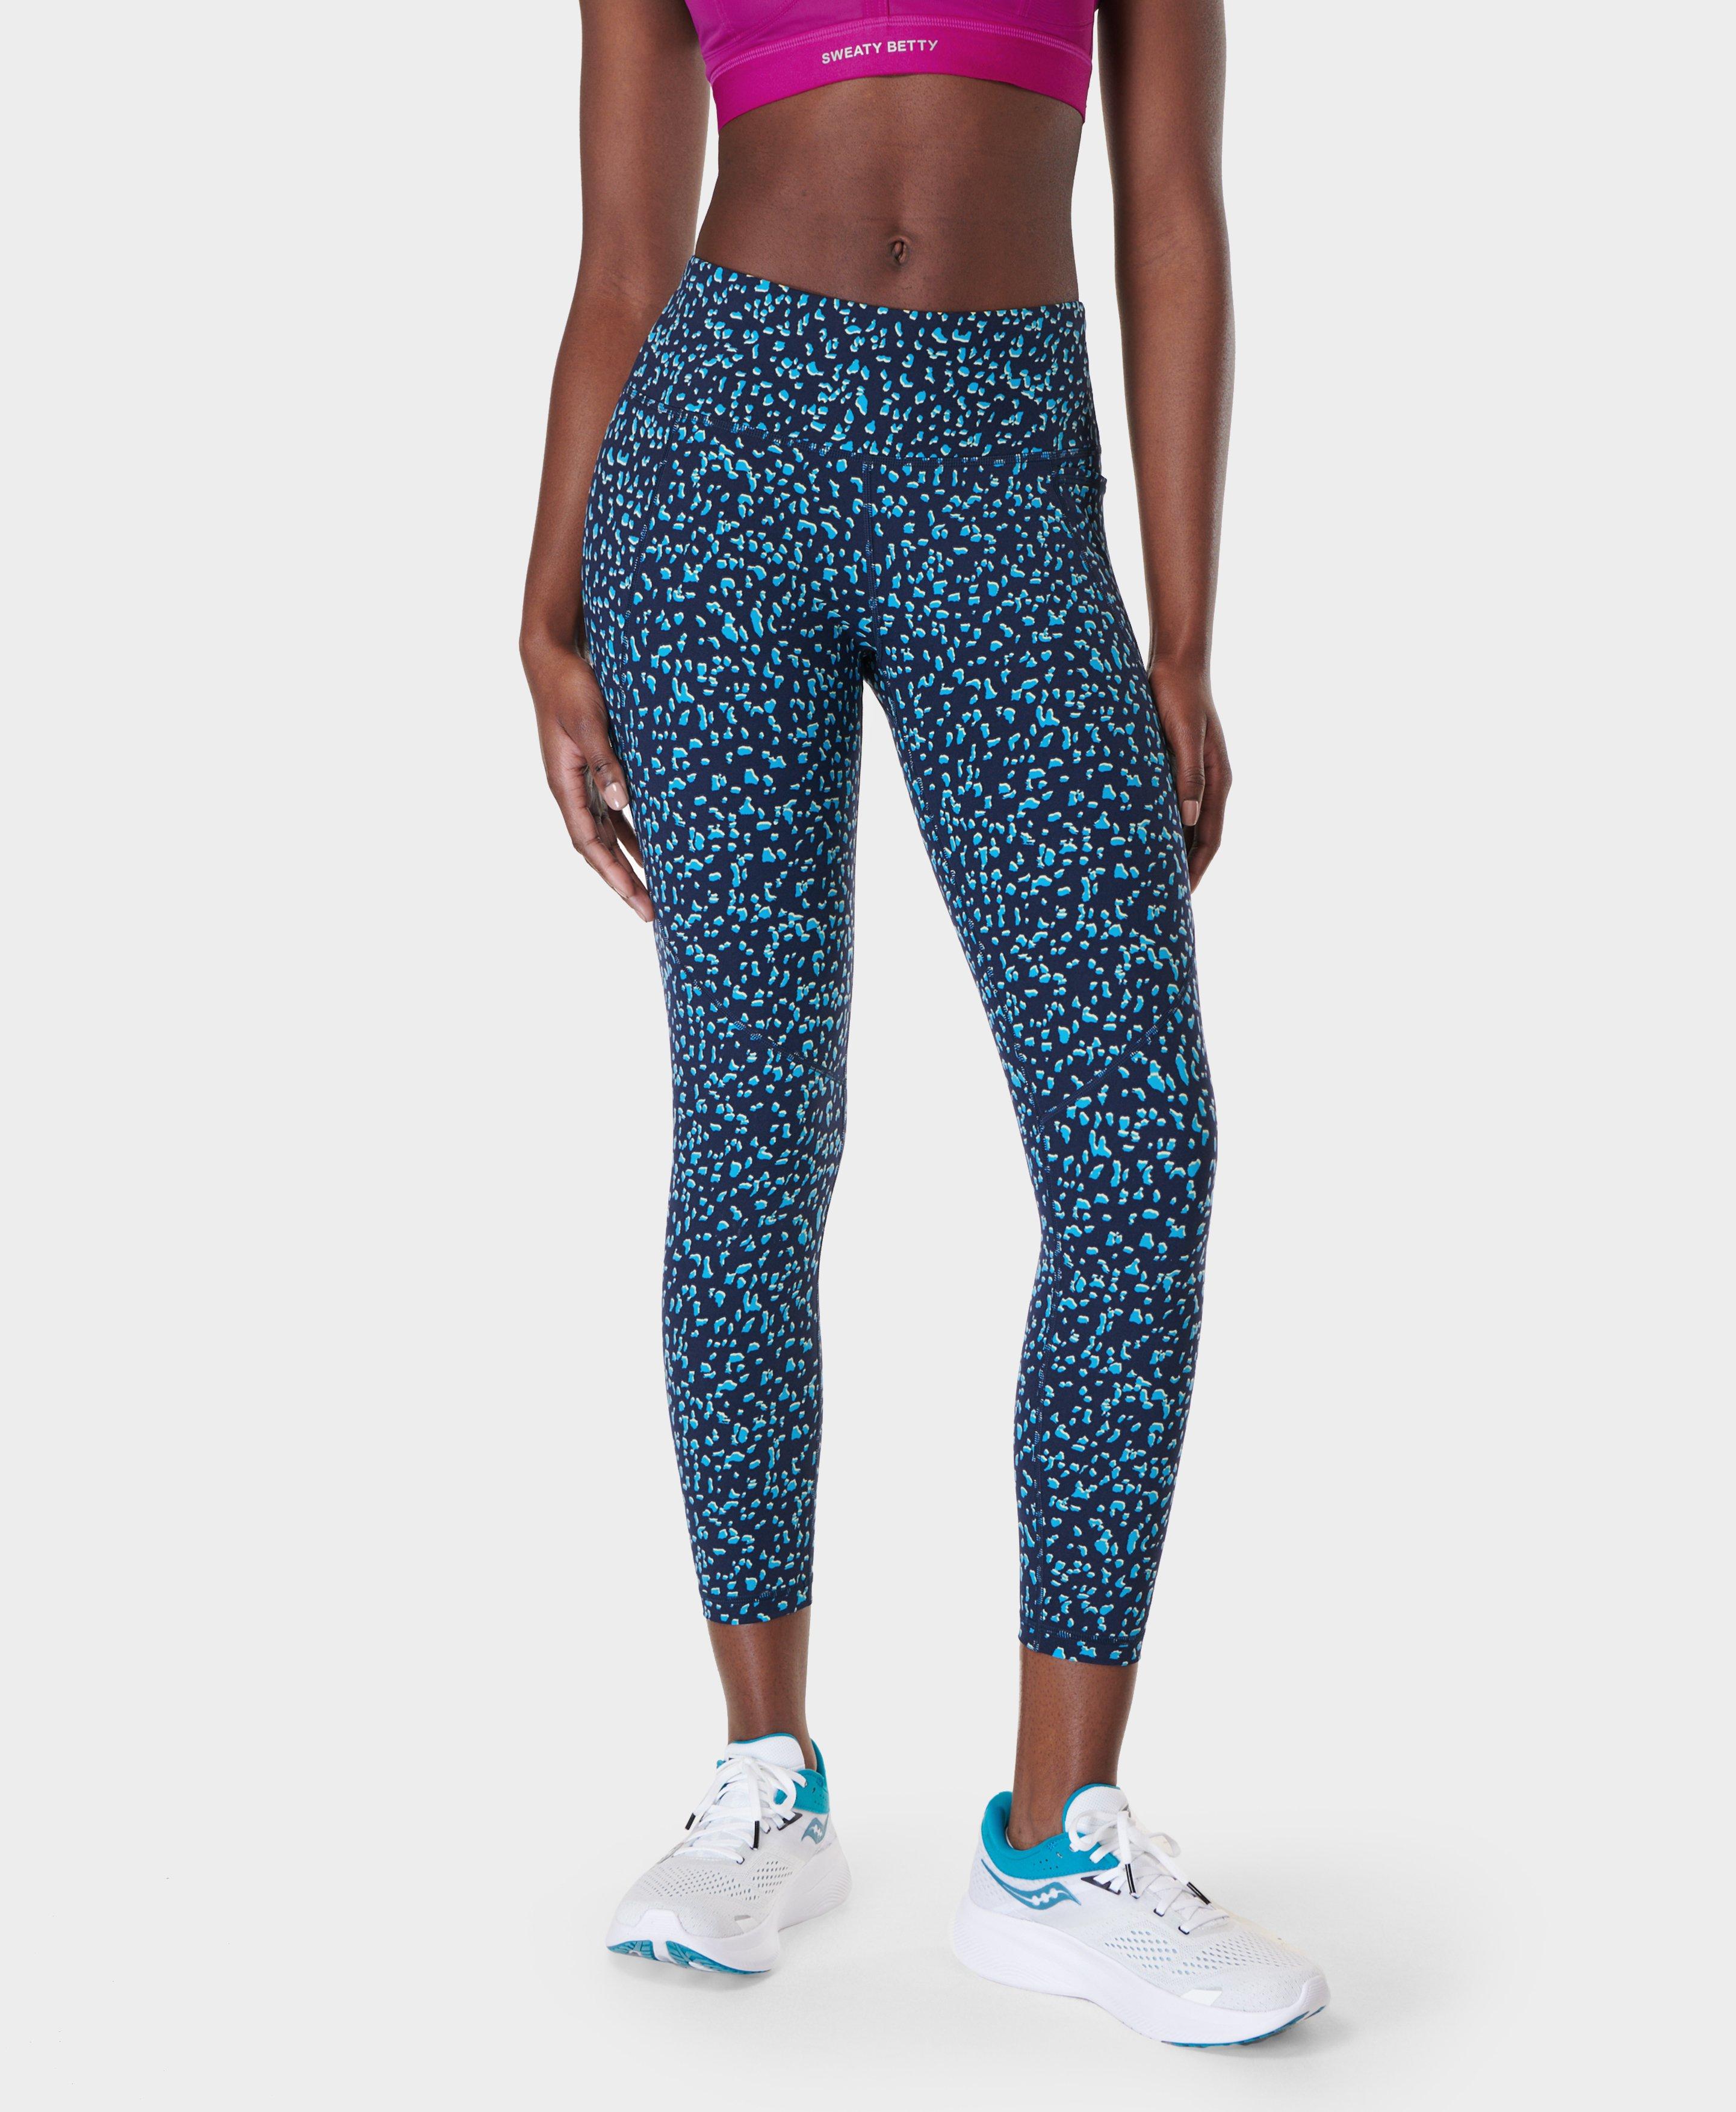 Sweaty Betty Sale - Shop up to 60% off